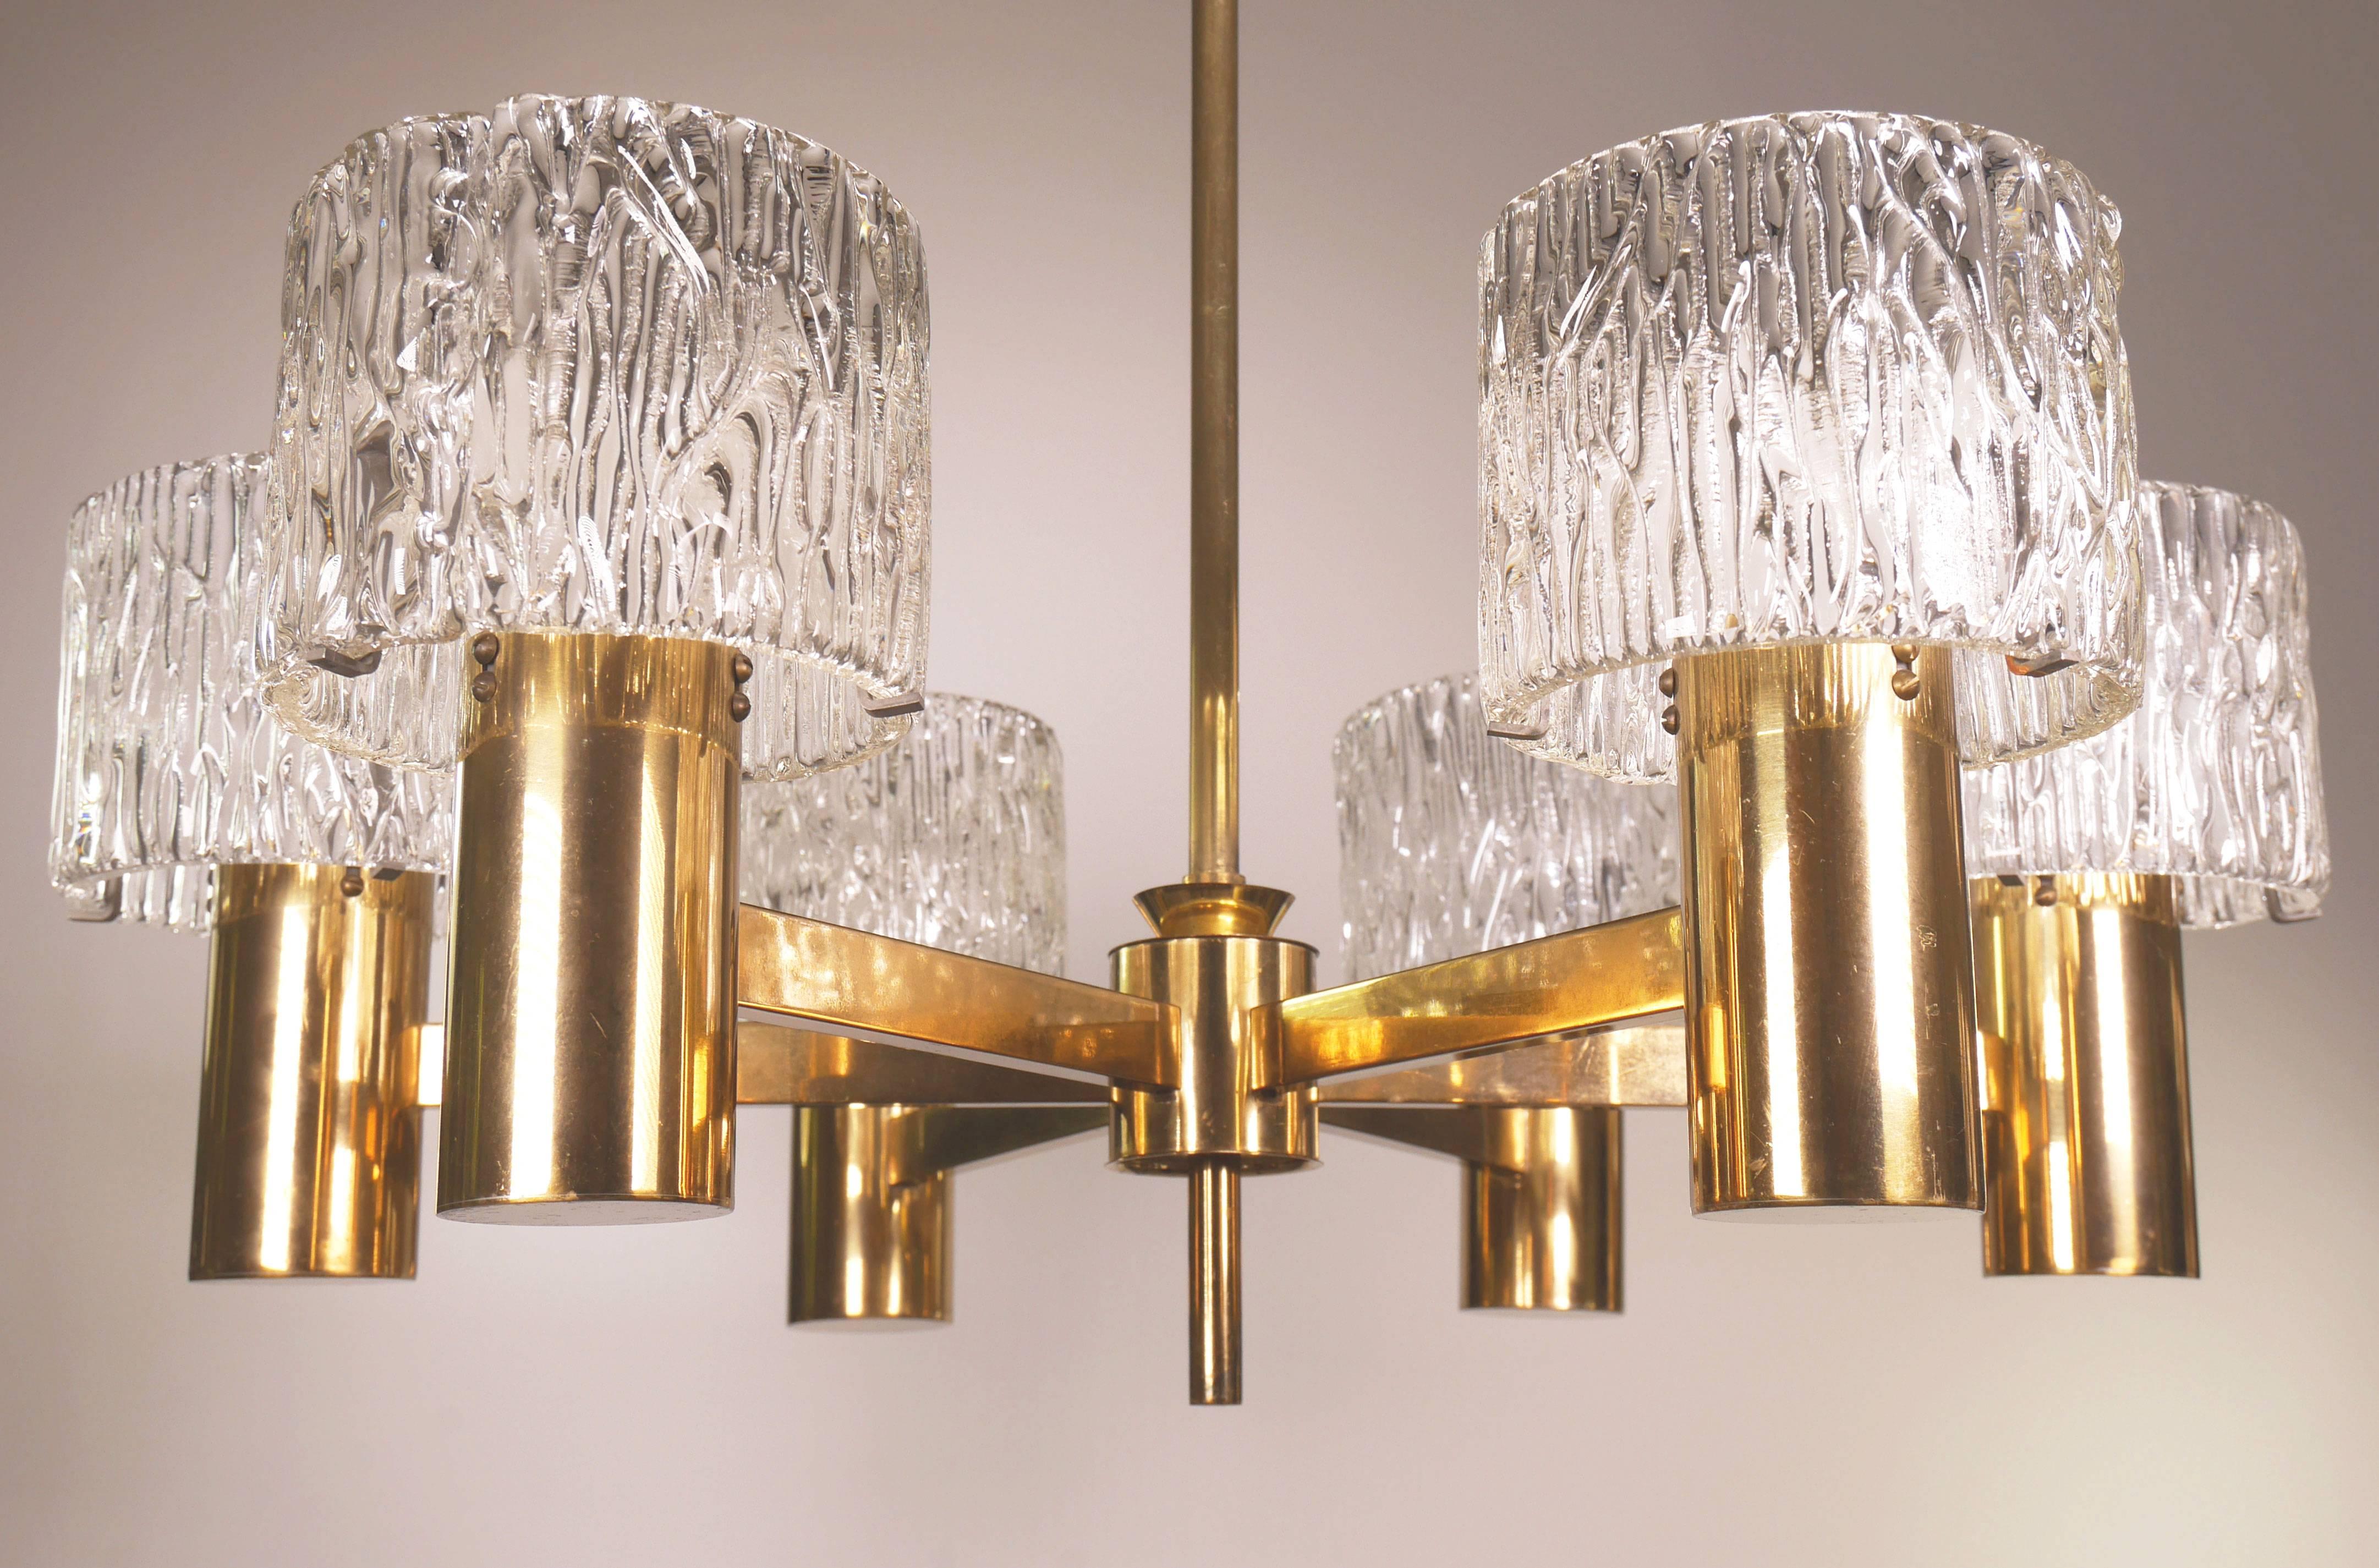 Six-arm Mid-Century Swedish Modern chandelier composed of textured tubular glass on brass mount, brass stem and brass canopy. Designed by Carl Fagerlund for Swedish Orrefors.